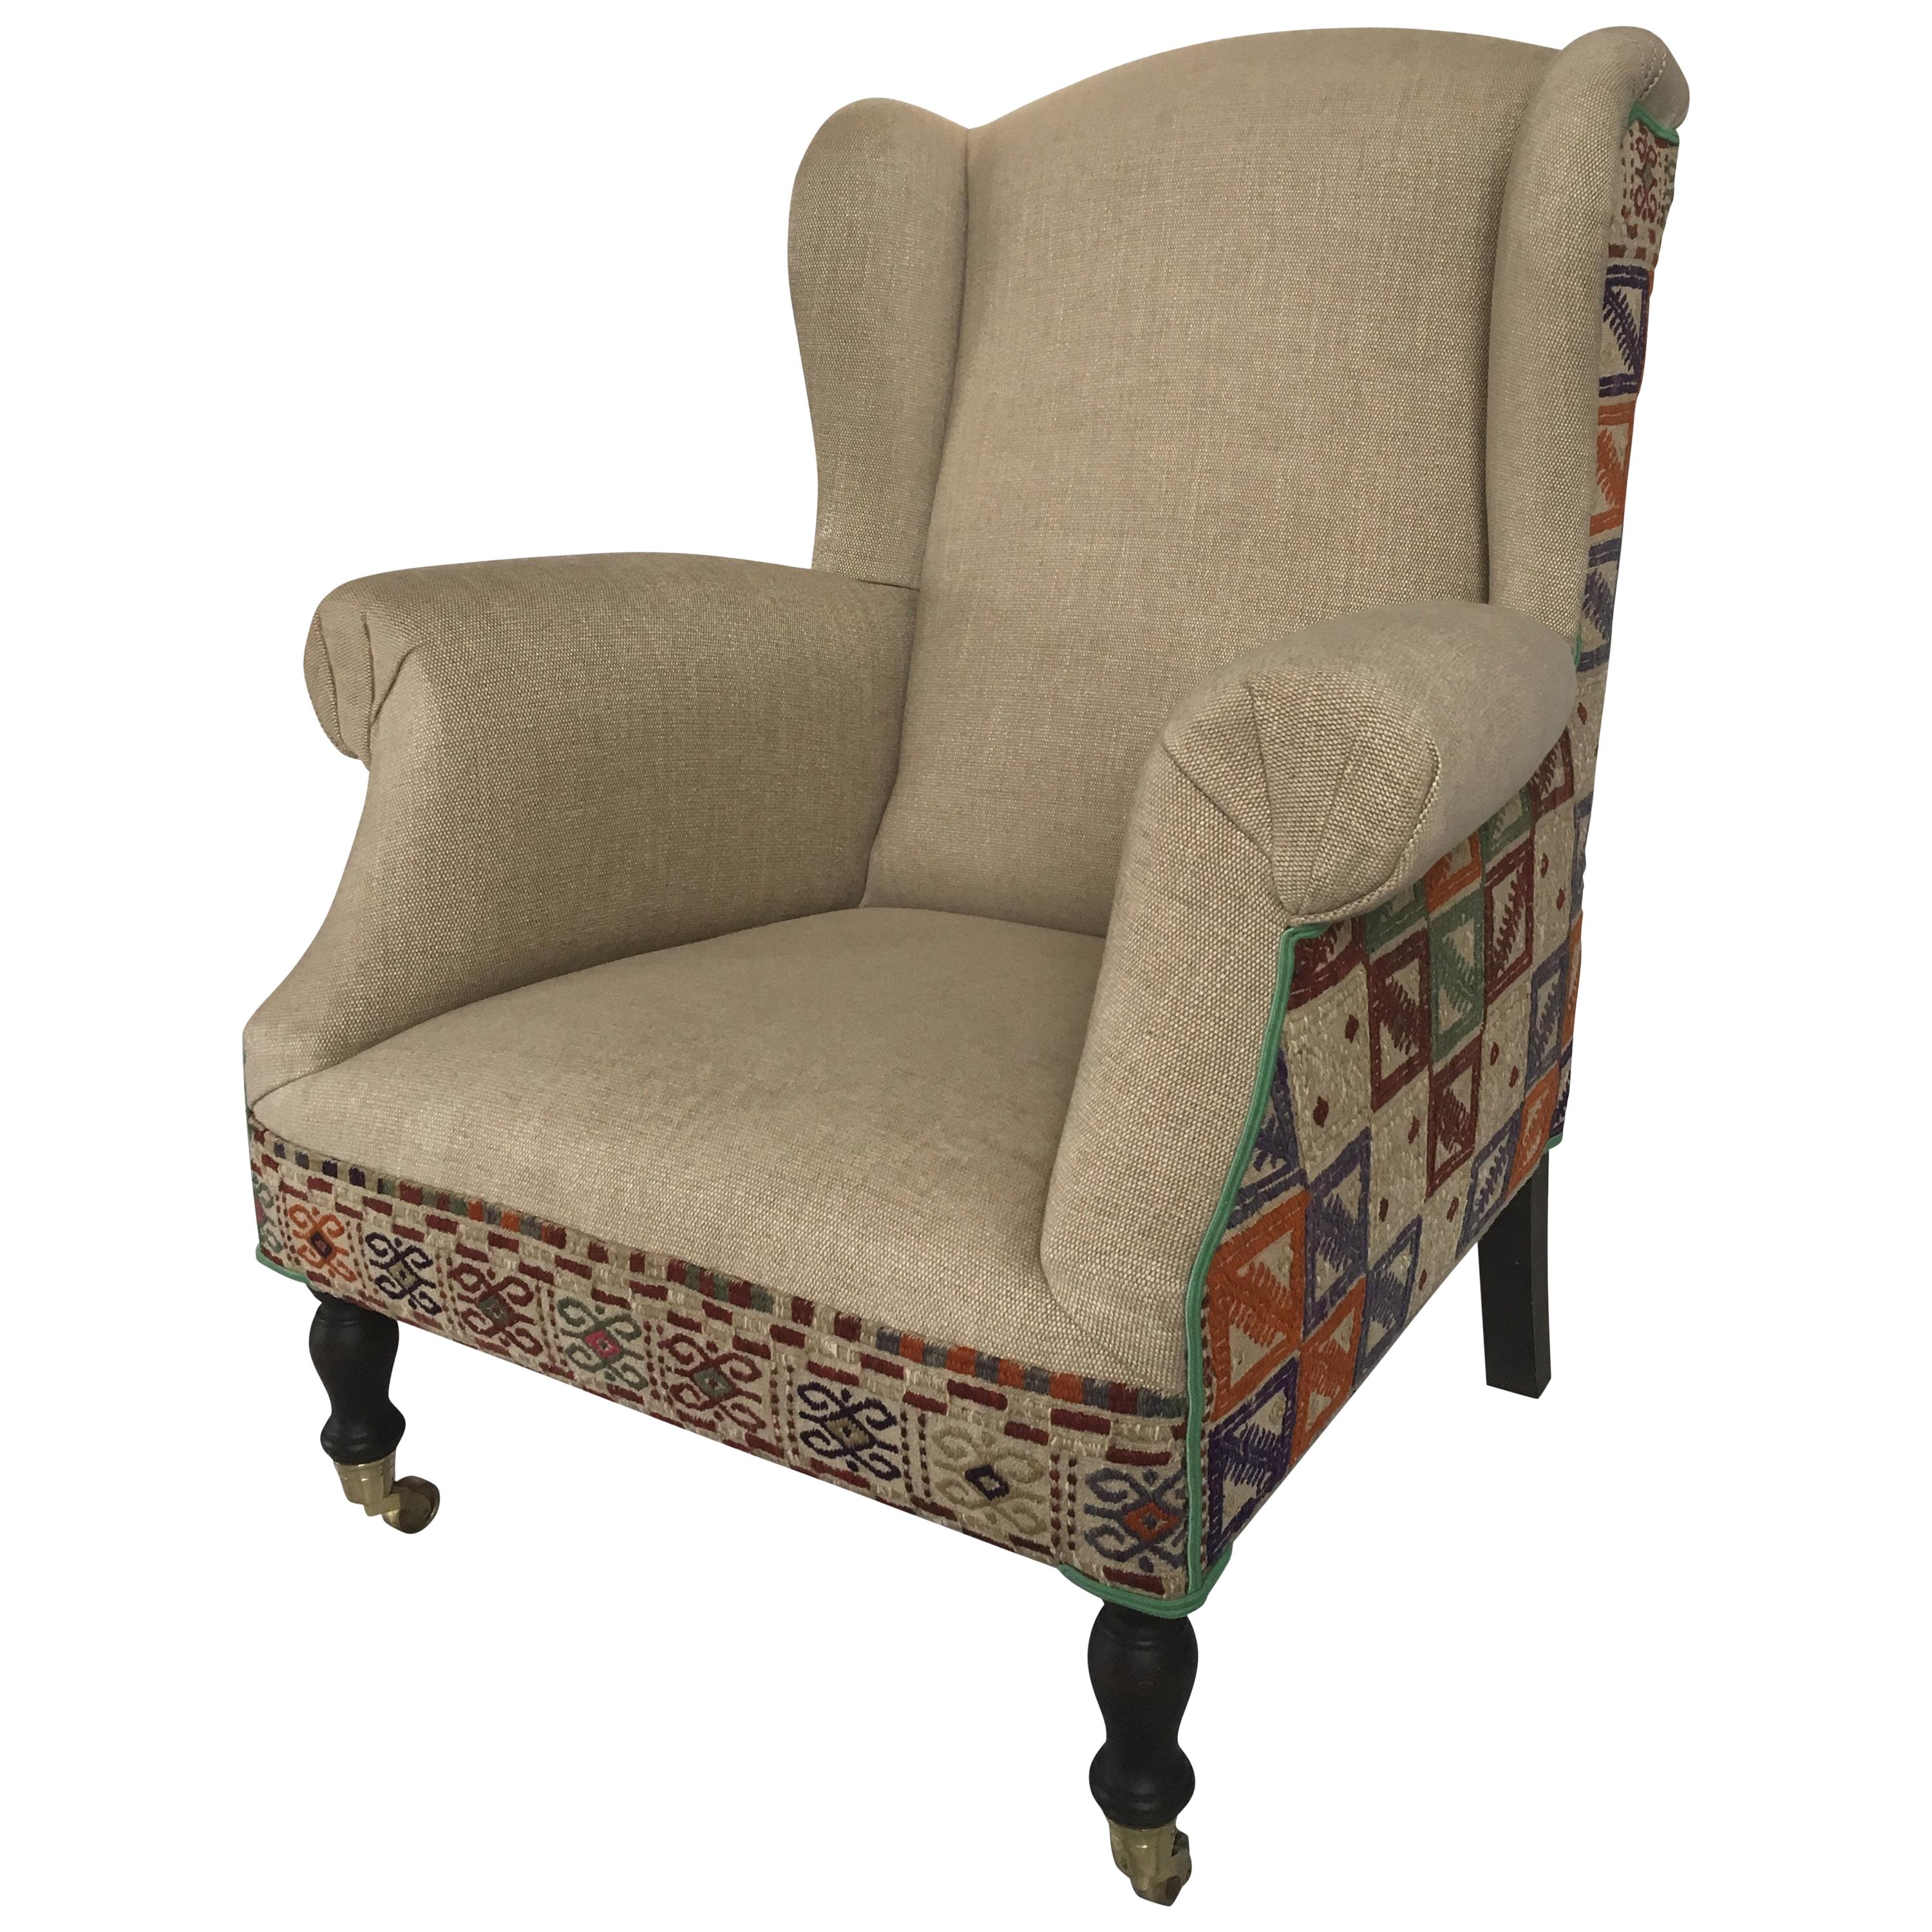 Wingchair Queen Anne Style with Kelim Fabric